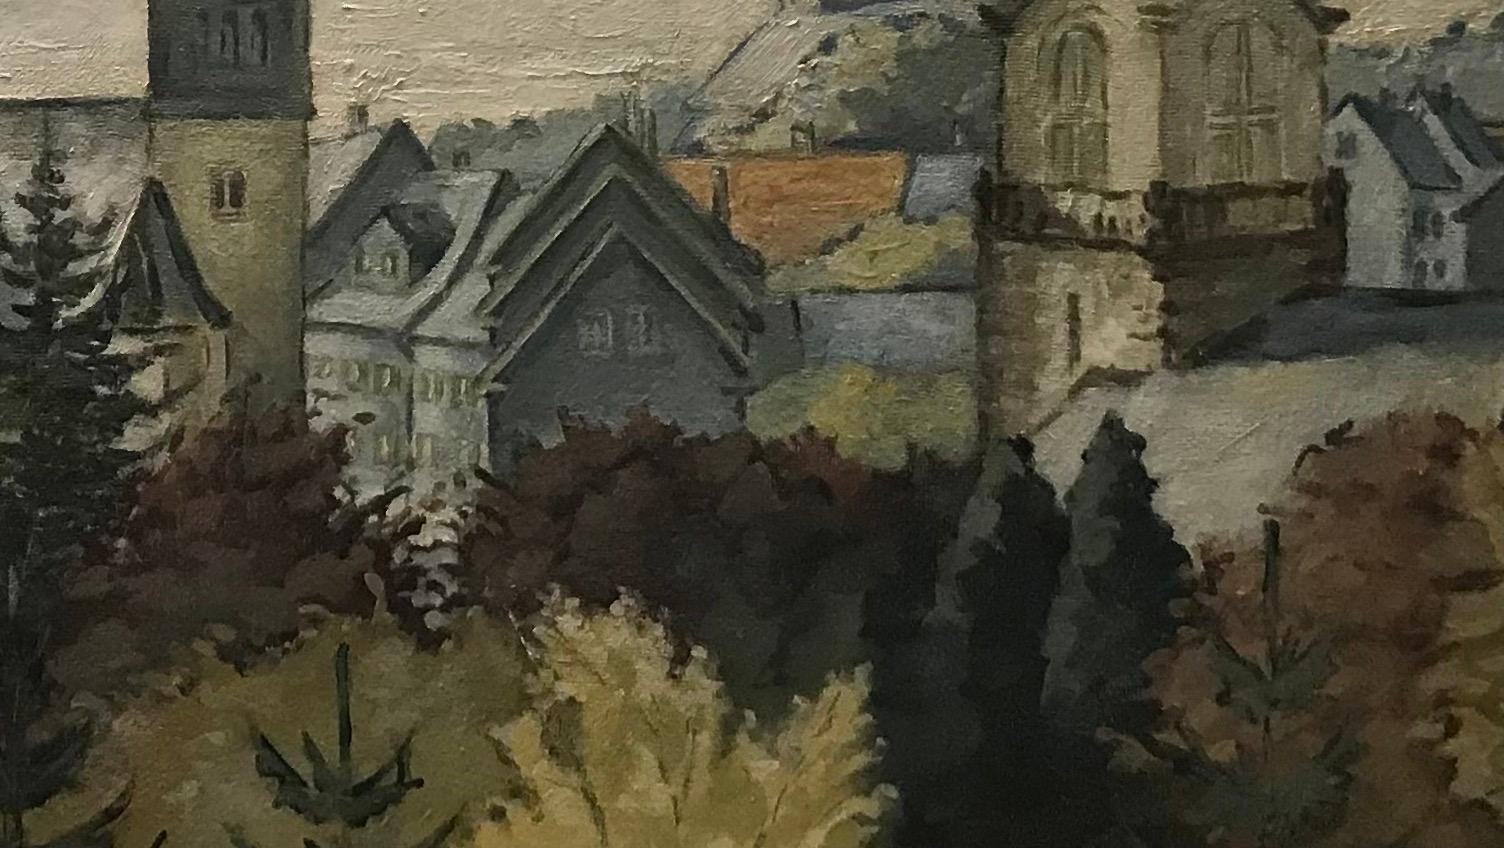 Landscape of a village with a view of steeples - Oil on canvas - Gray Landscape Painting by Unknown